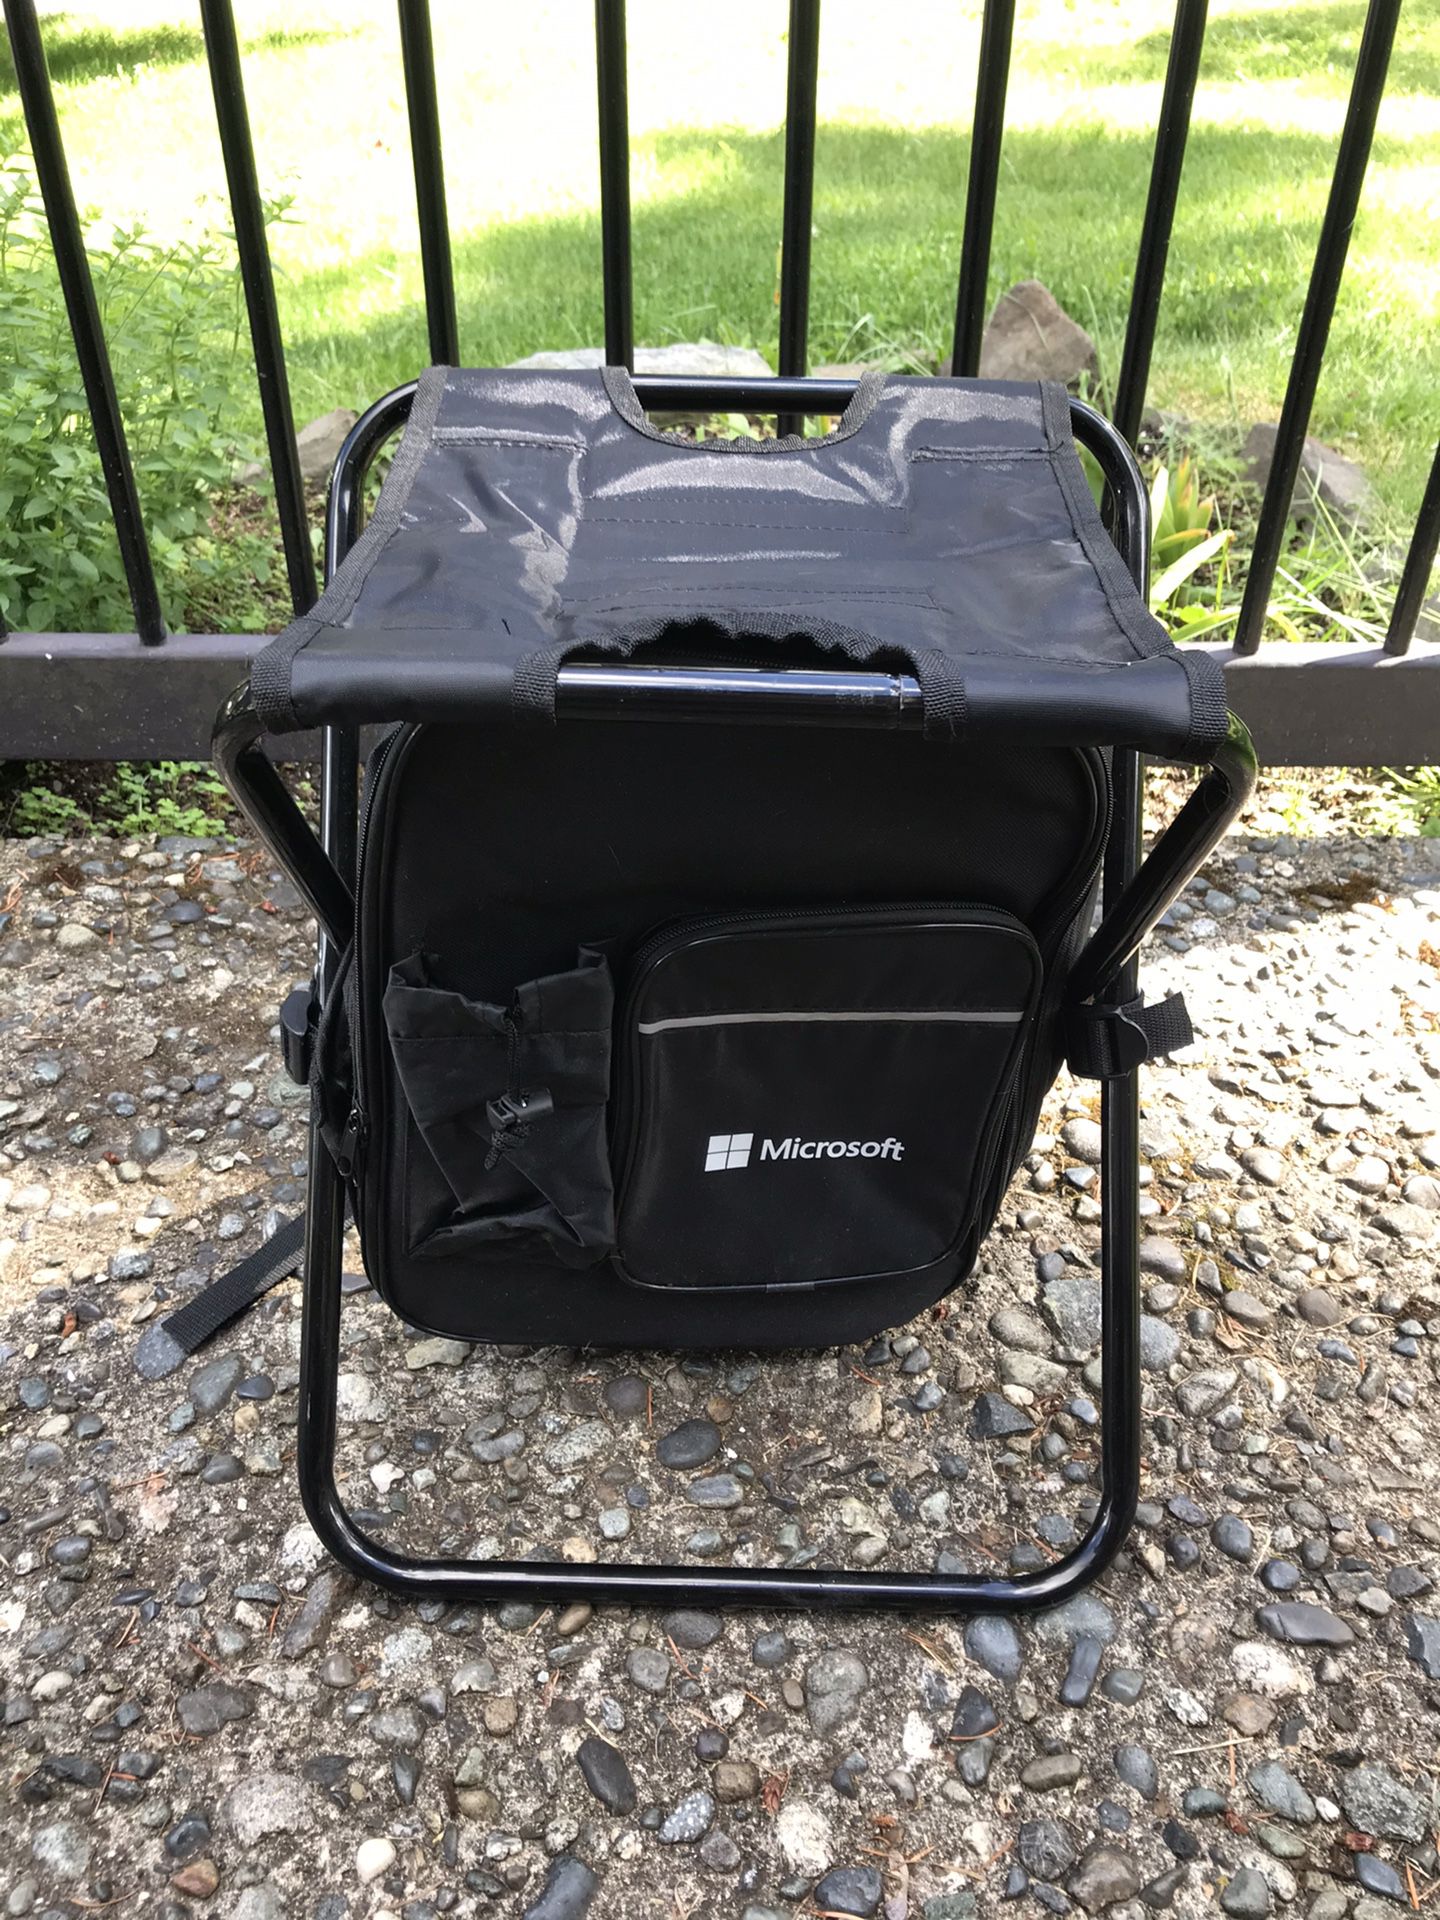 Backpack folding chair